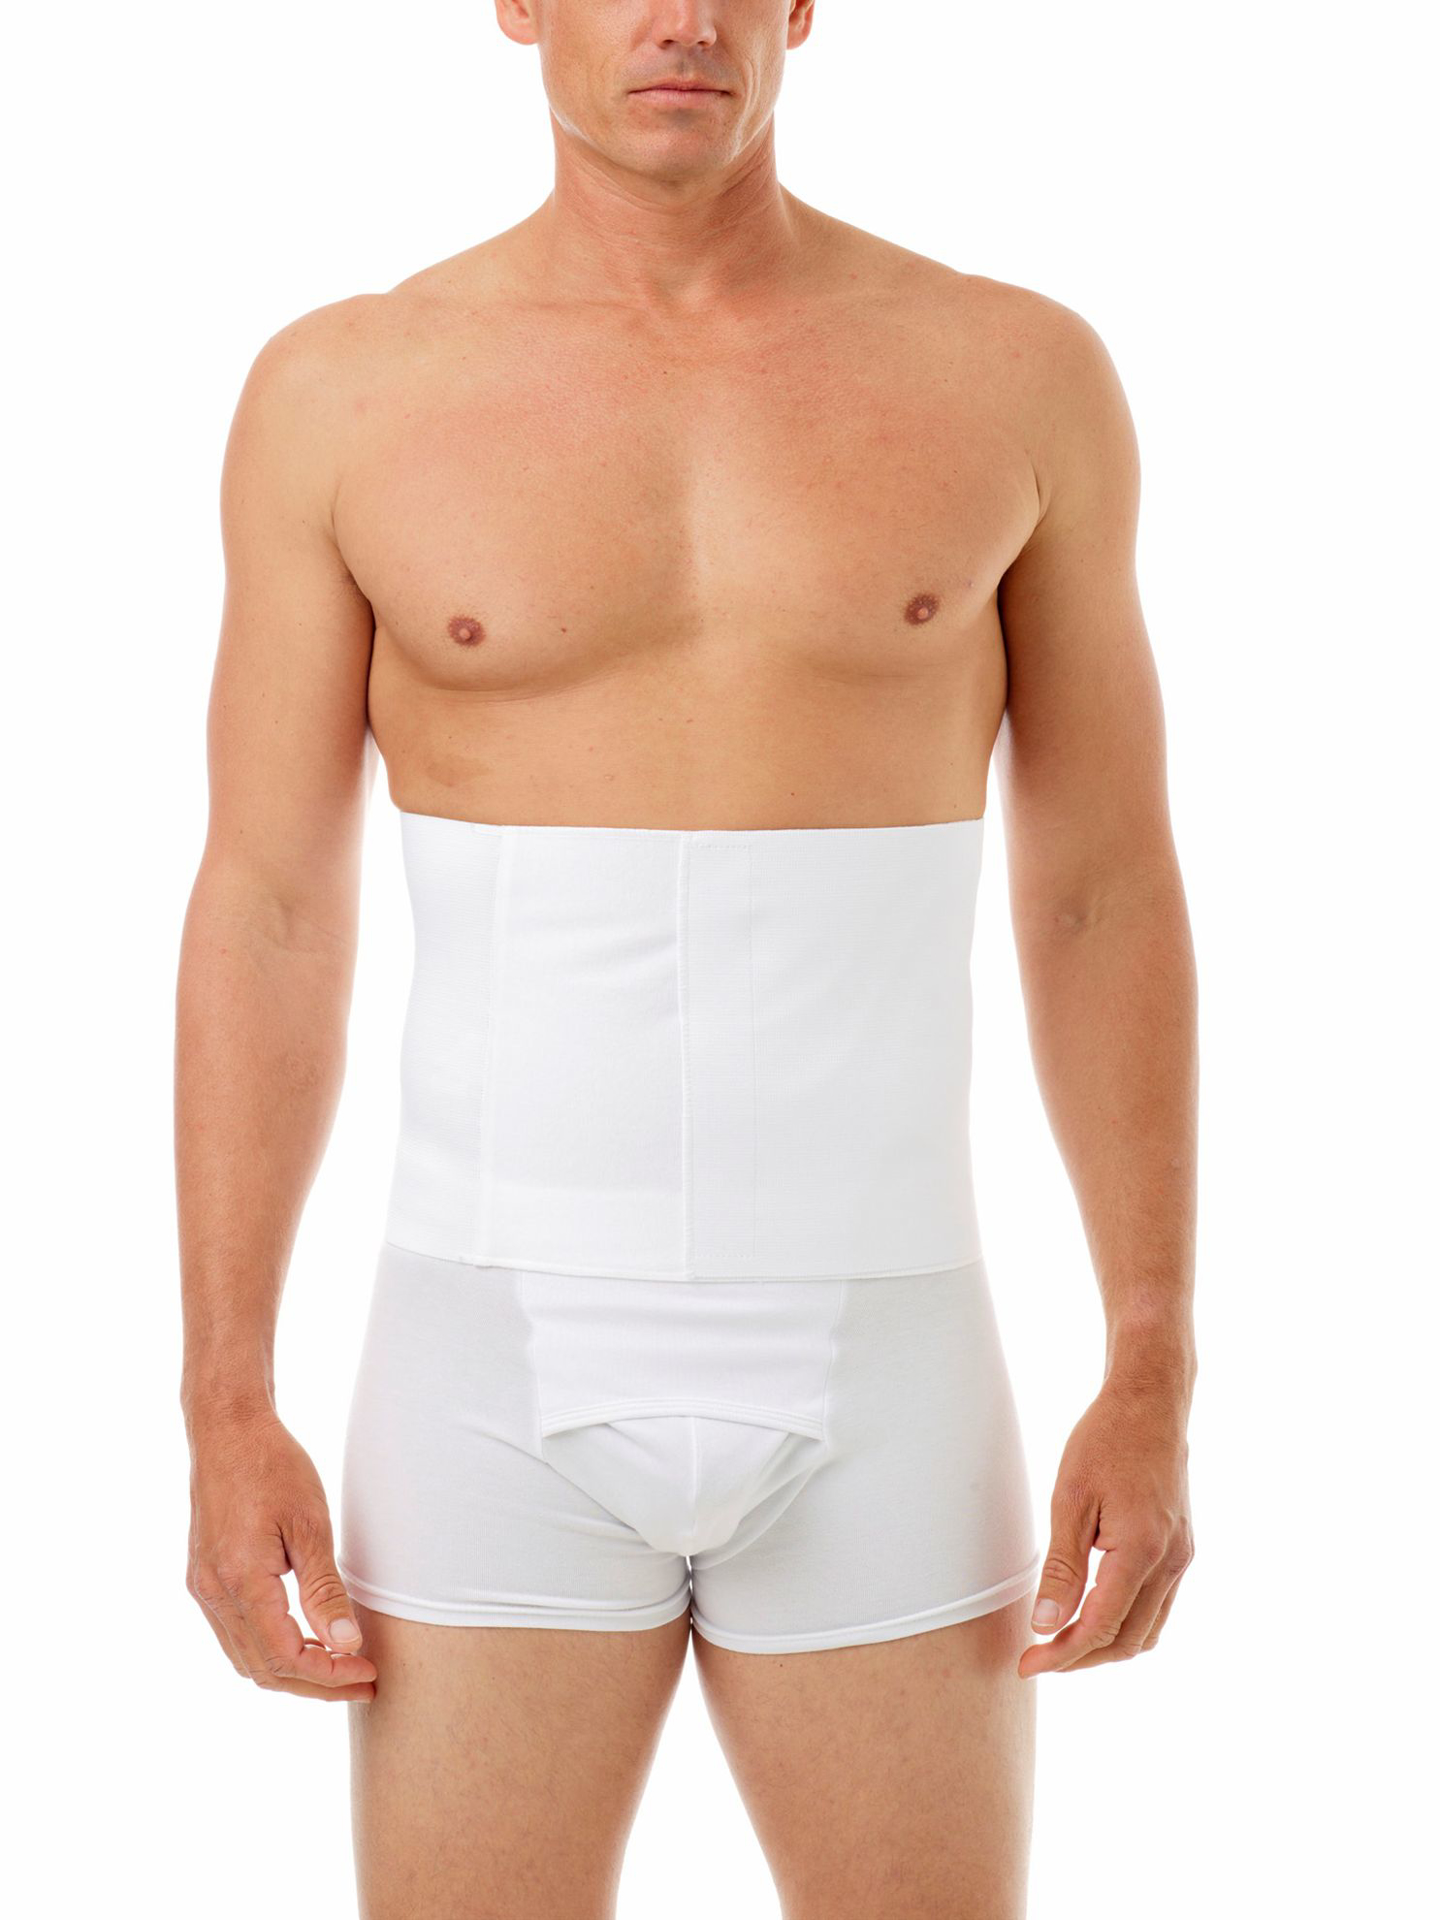 https://www.underworks.com/images/thumbs/0000028_9-inch-tummy-trimming-belt-with-velcro-closure.jpeg